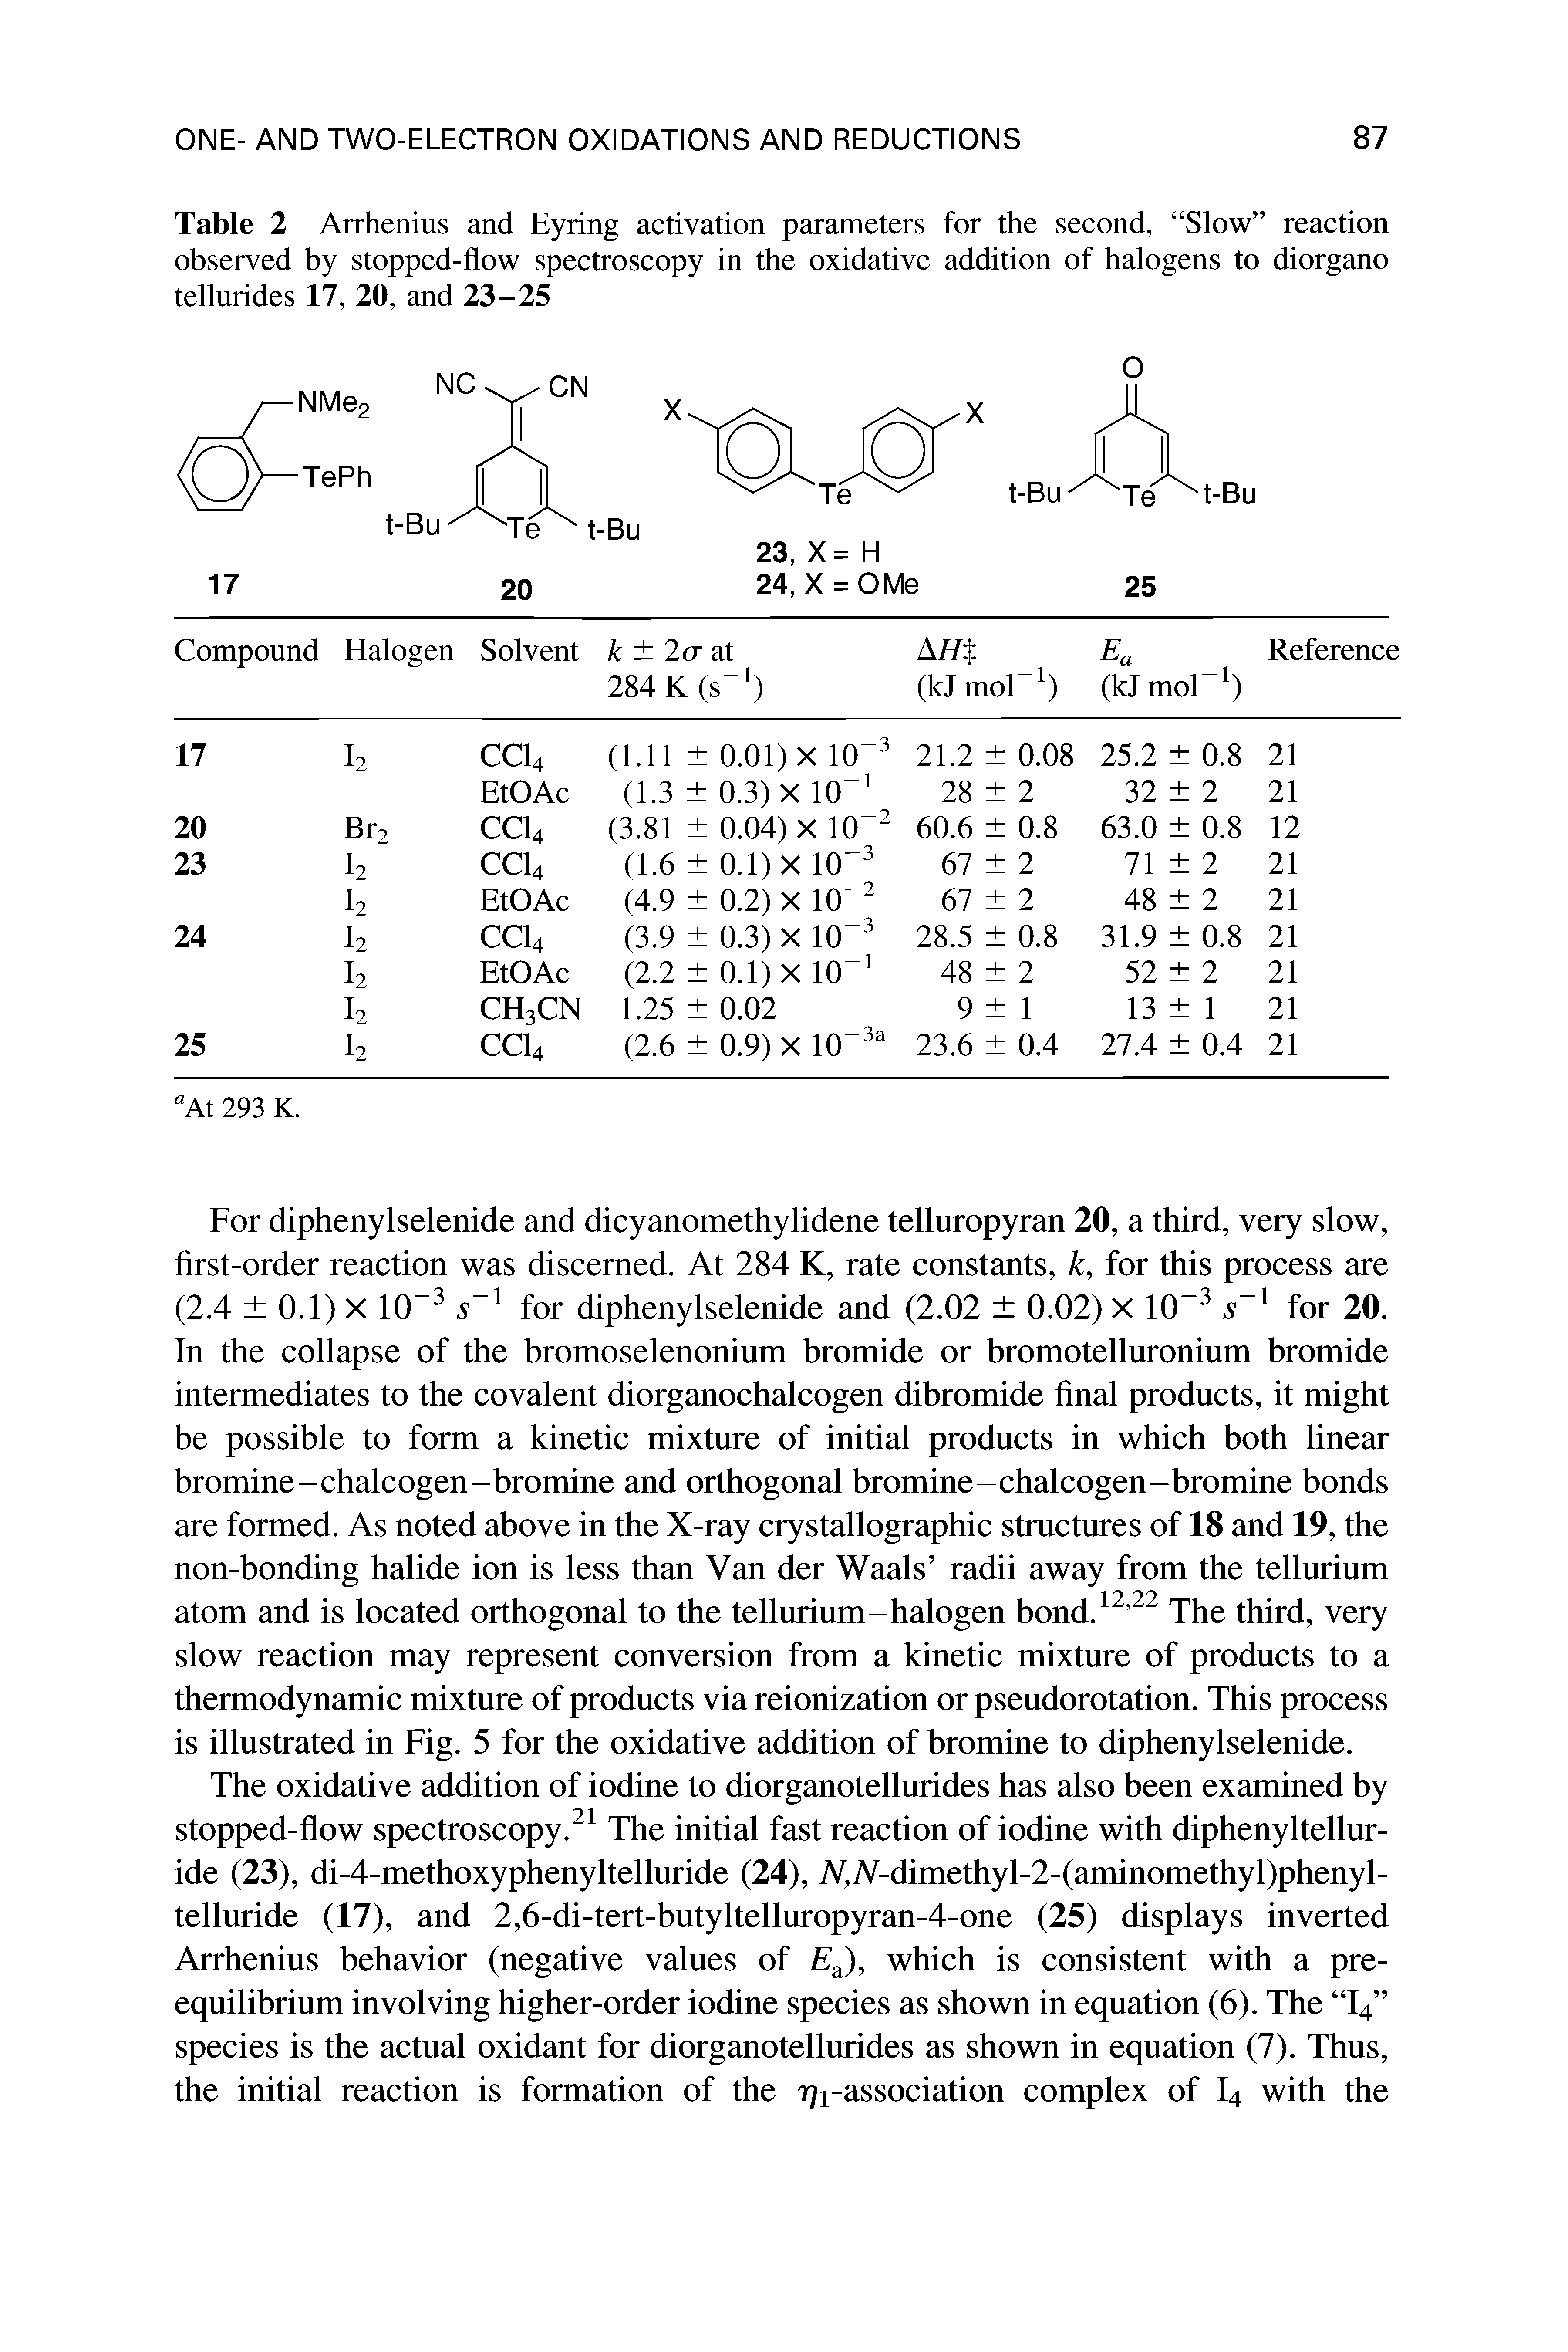 Table 2 Arrhenius and Eyring activation parameters for the second, Slow reaction observed by stopped-flow spectroscopy in the oxidative addition of halogens to diorgano tellurides 17, 20, and 23-25...